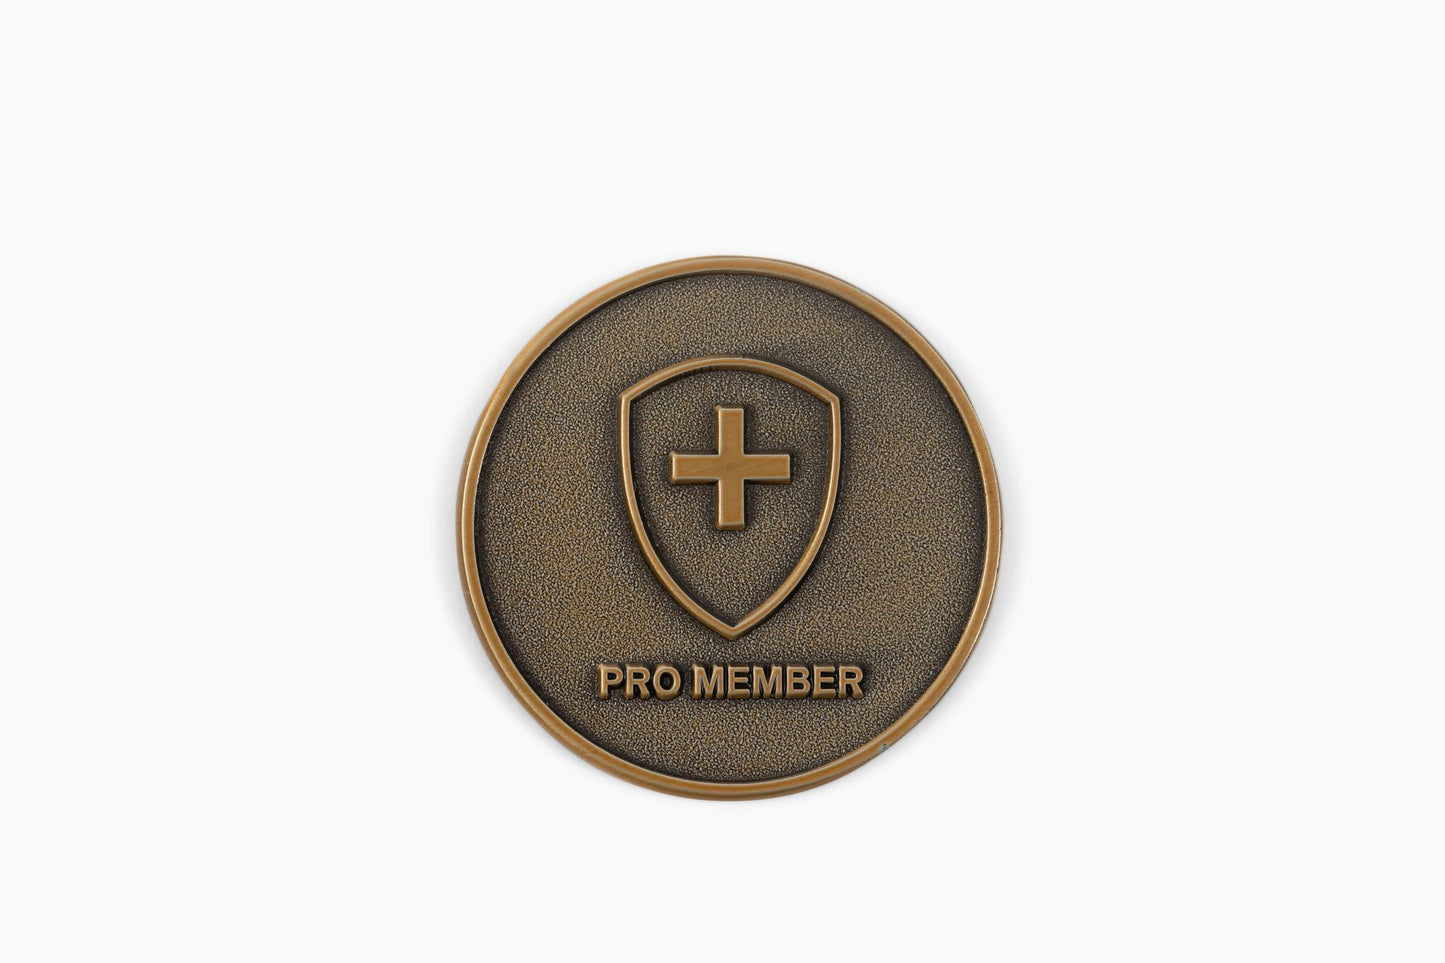 TheGrint PRO Ball Marker - Gold | PRO Members Only